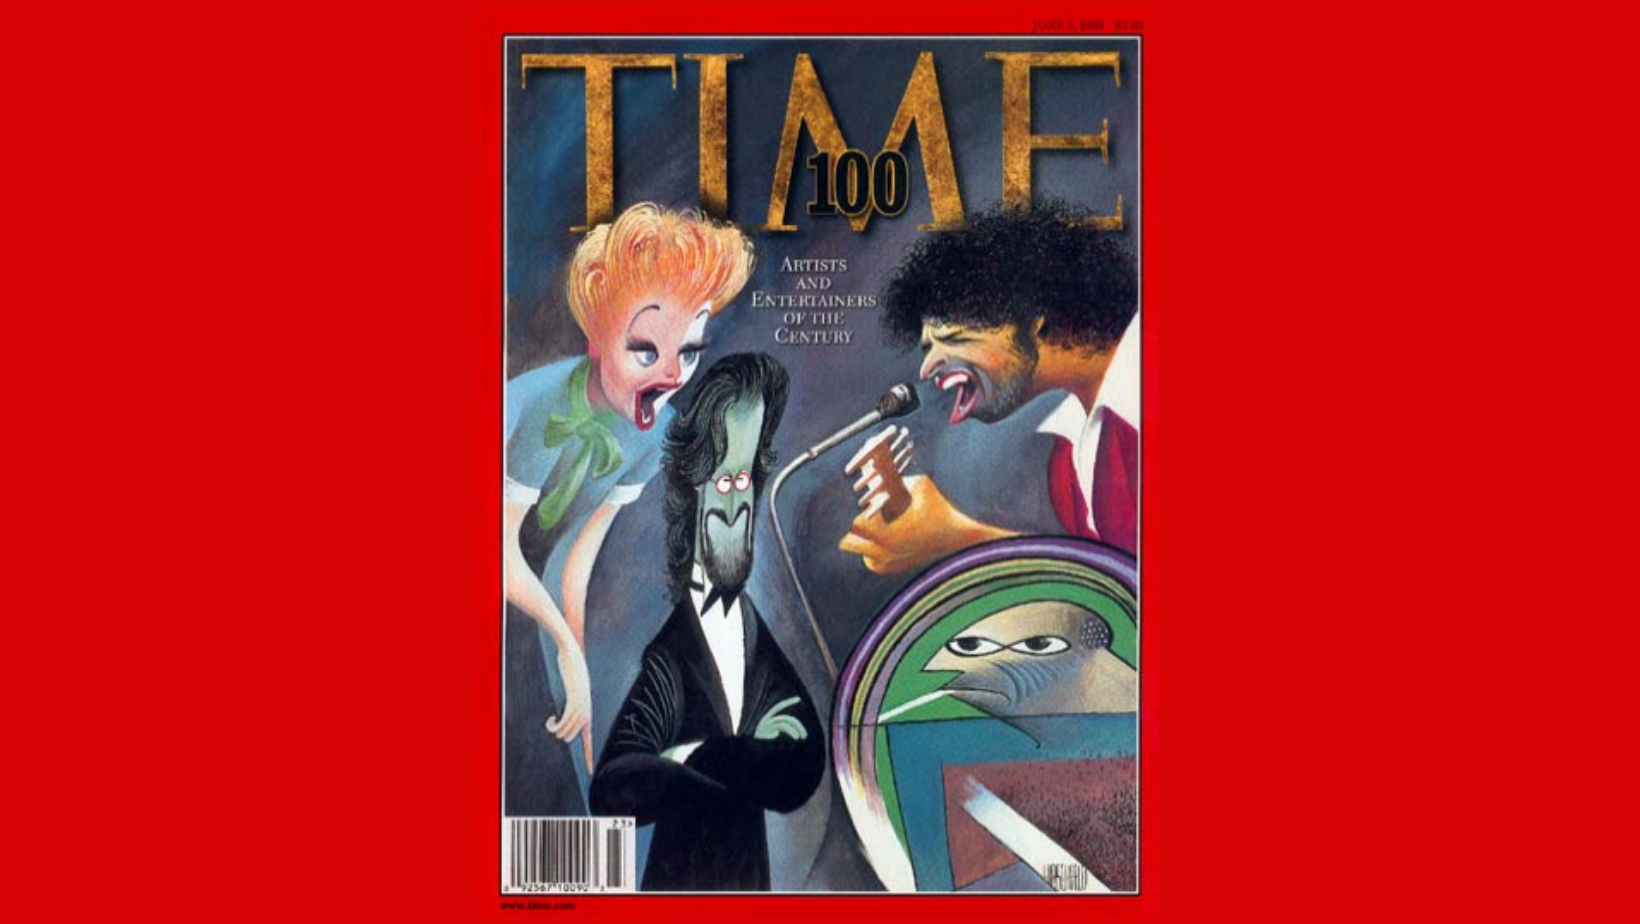 People in the world of art and entertainment most influential of the twentieth century. Time 100